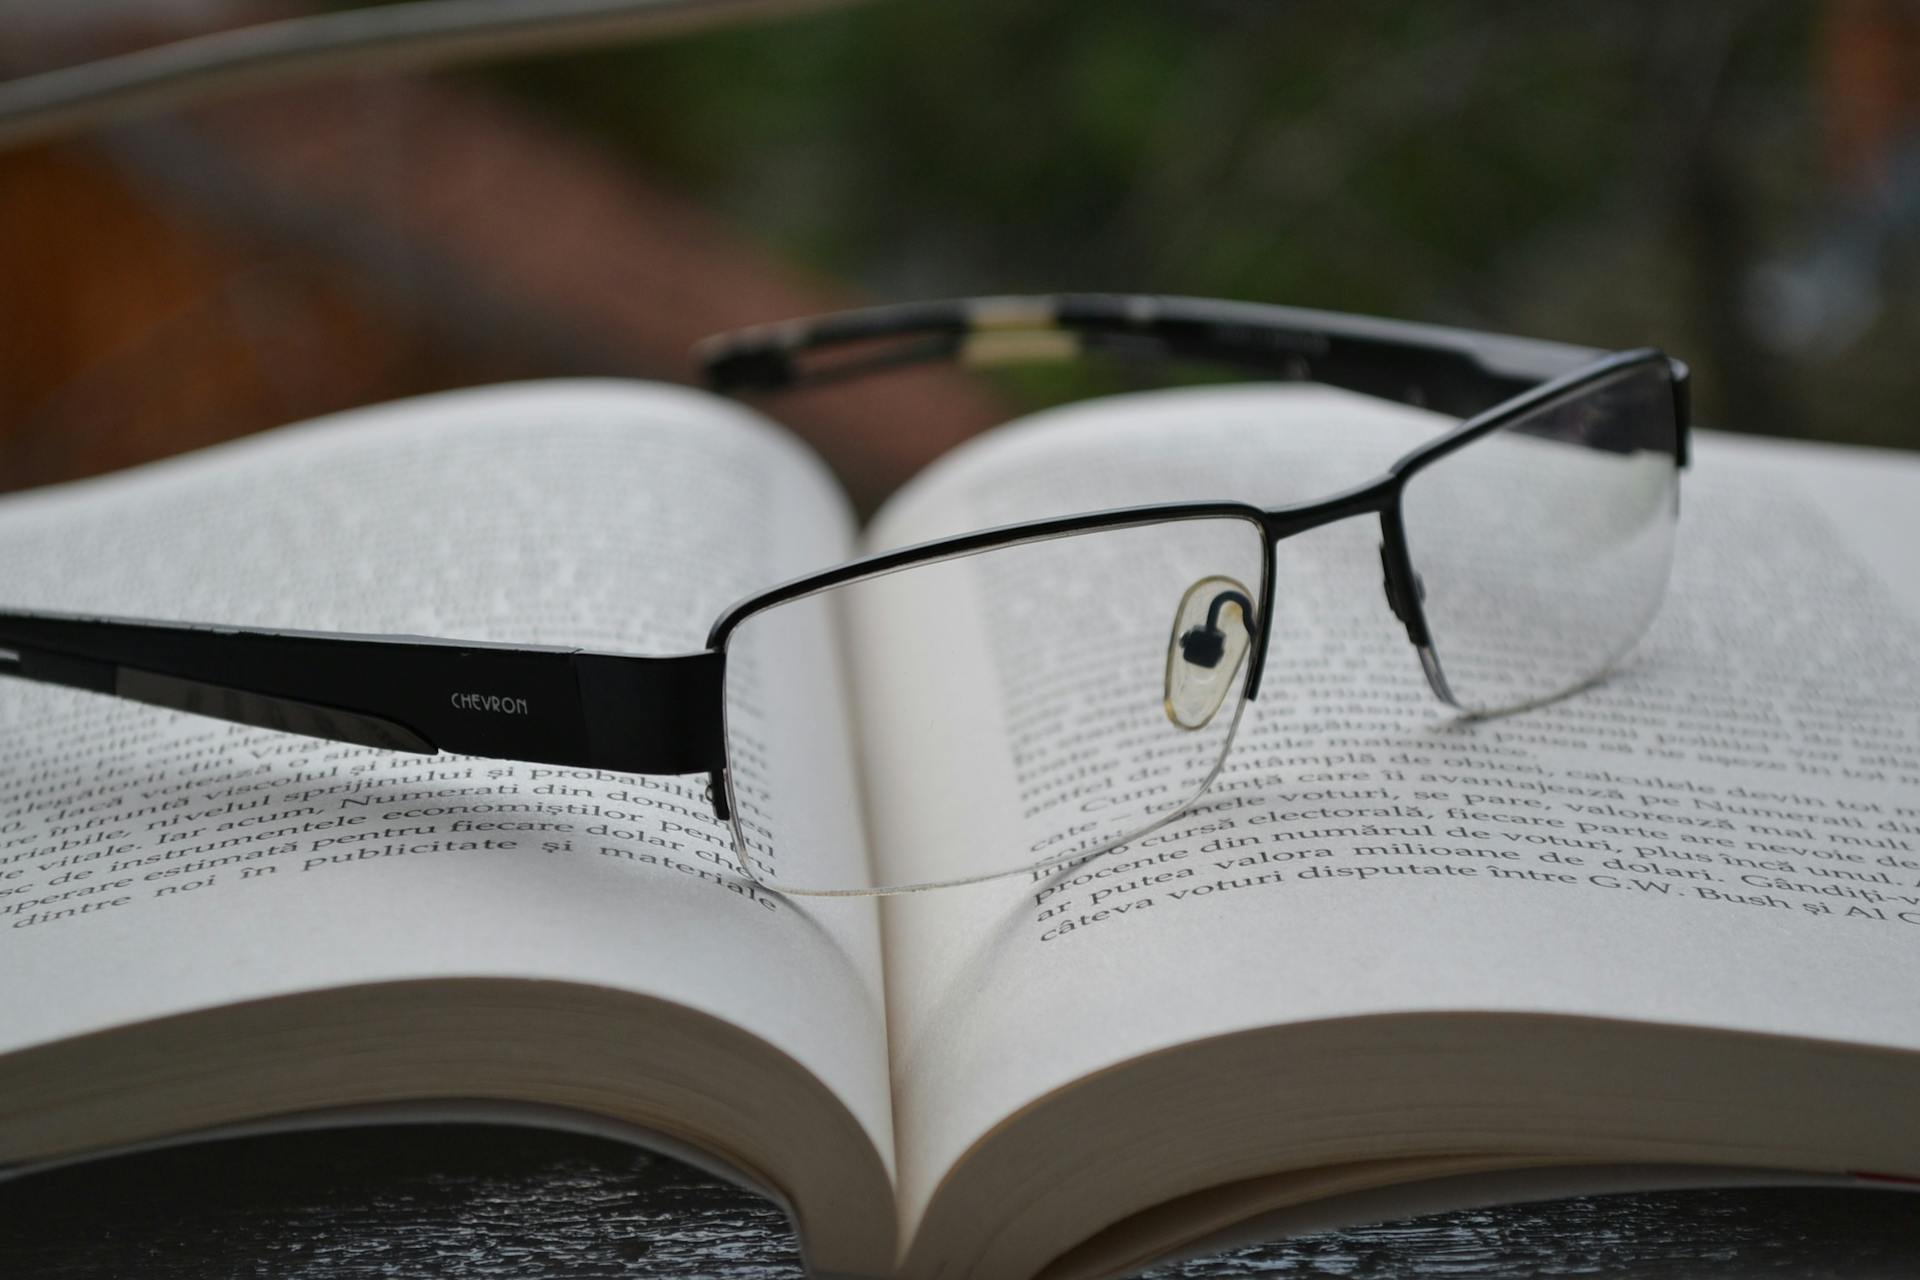 Glasses resting on book